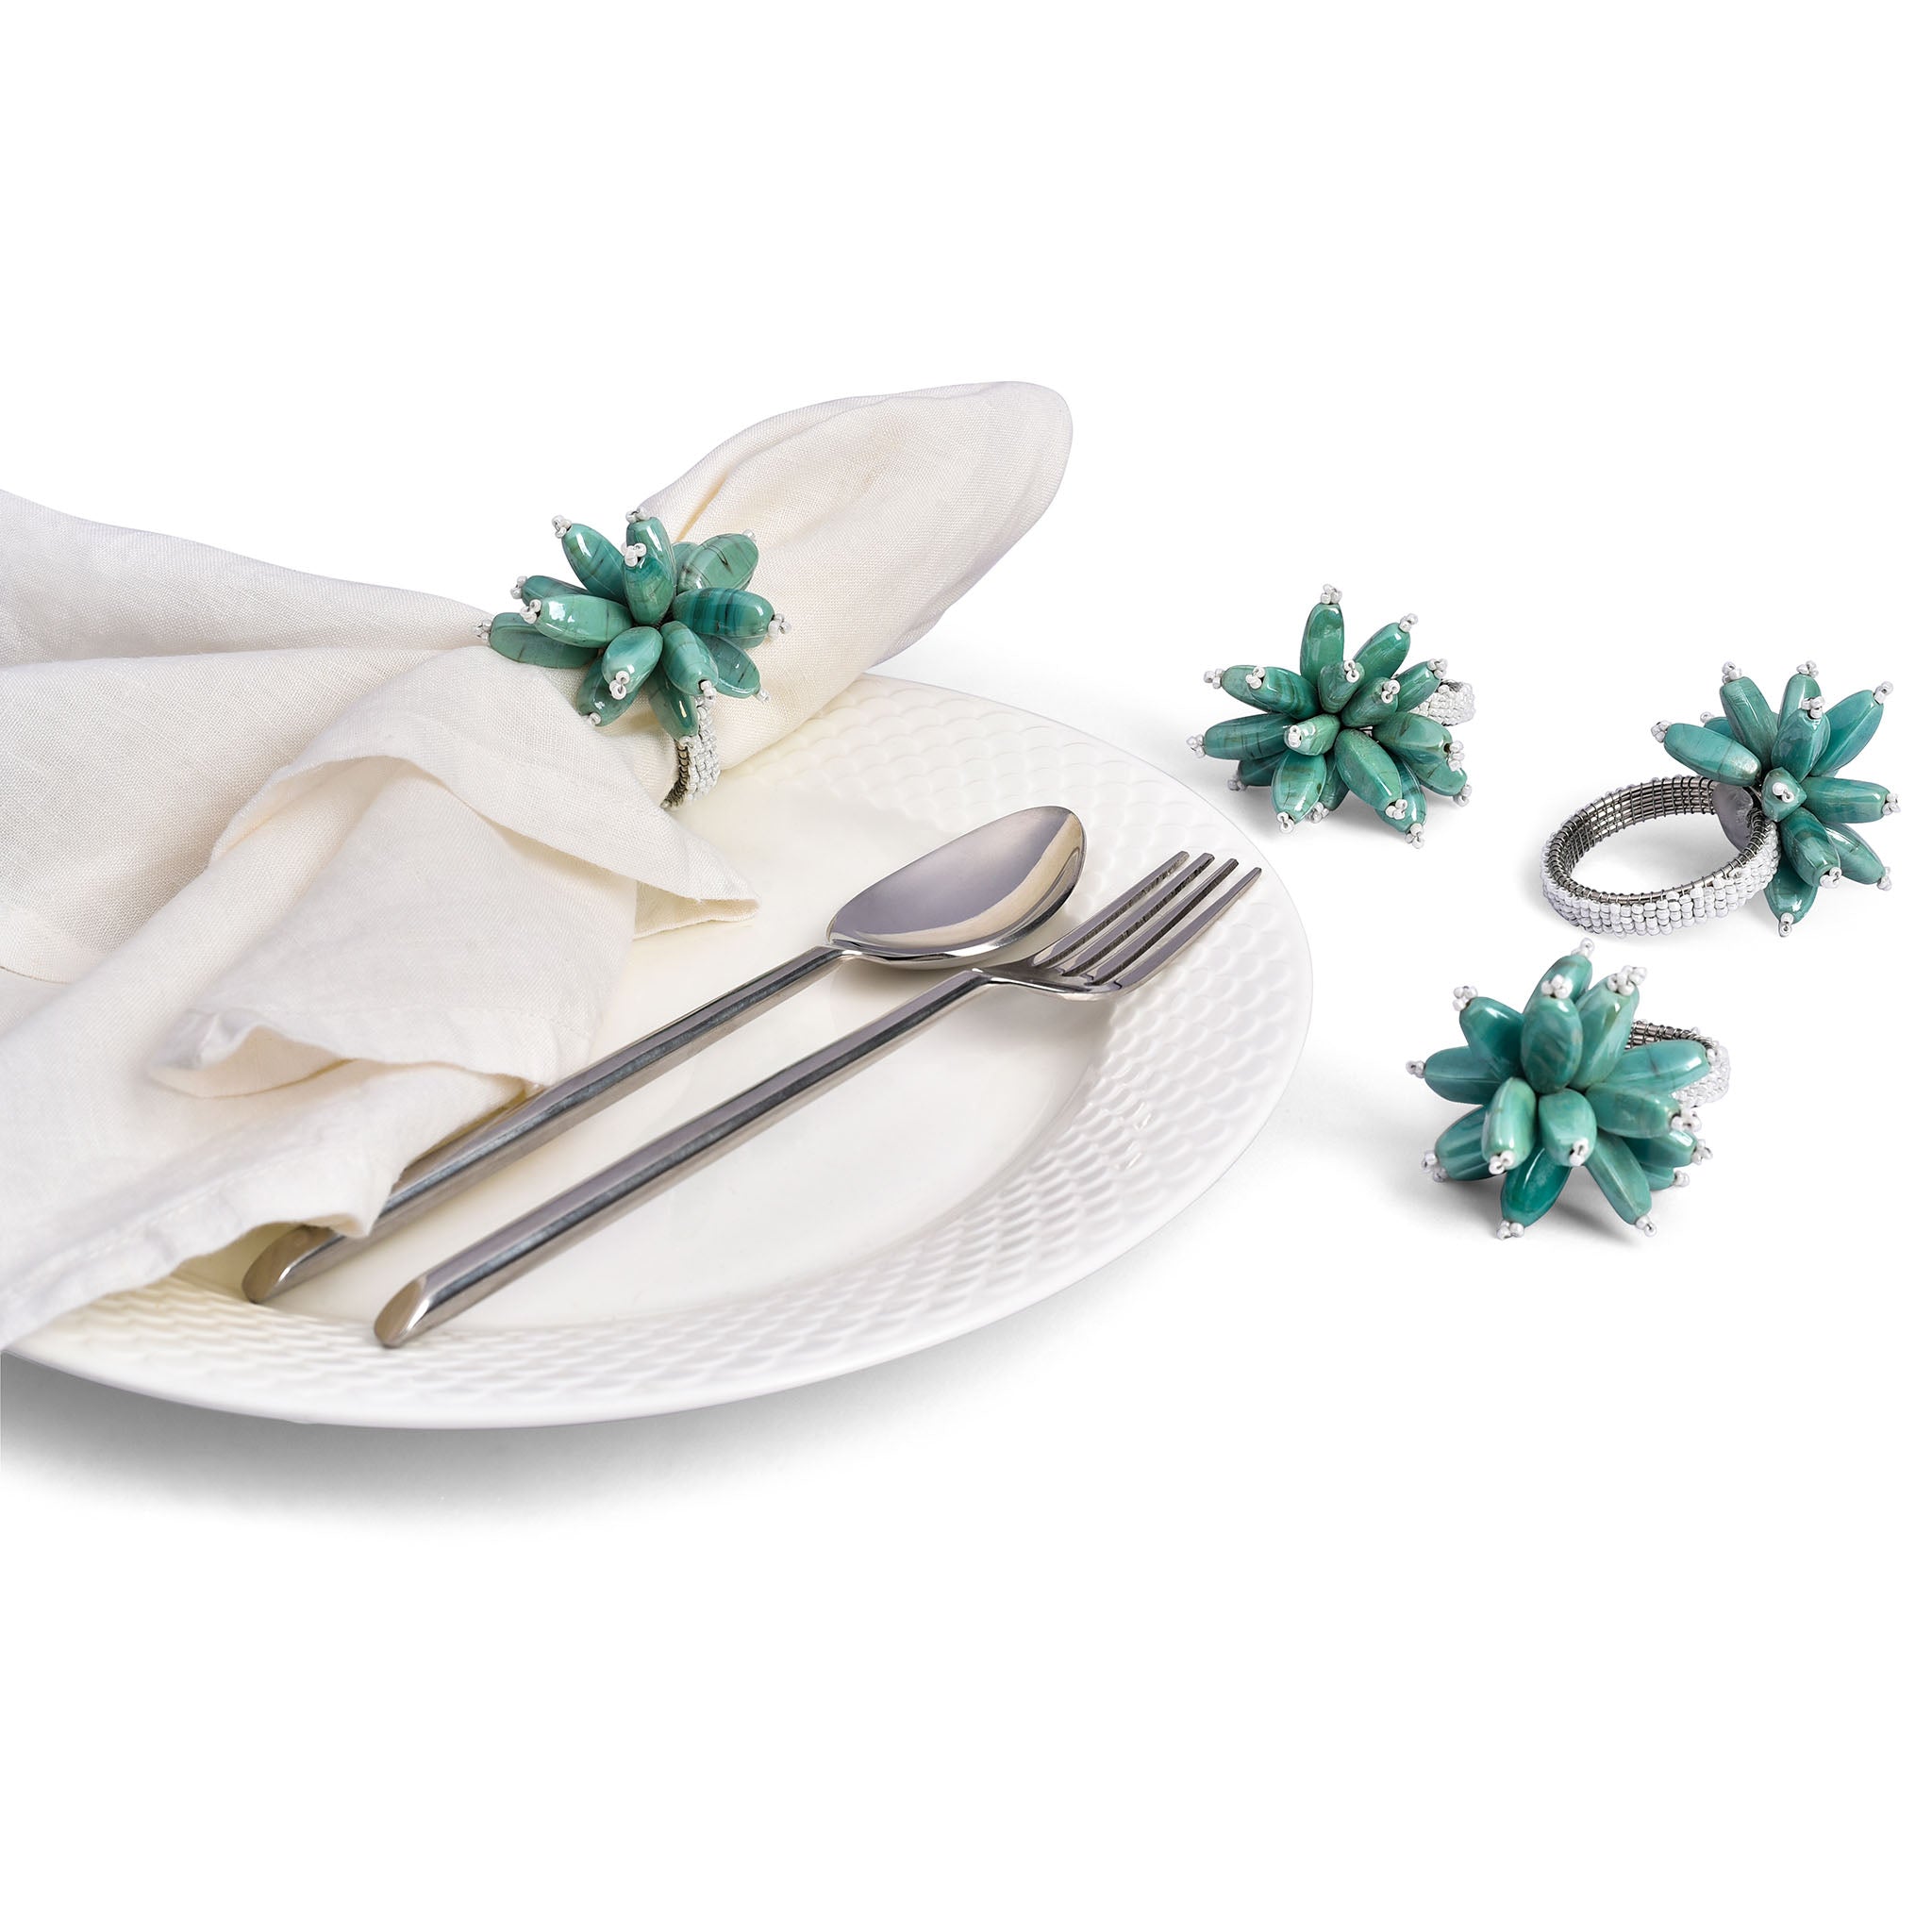 Stay Salty Table Setting for 4 - Embroidered Placemats, Napkin Rings & Table Runner in Cream & Teal